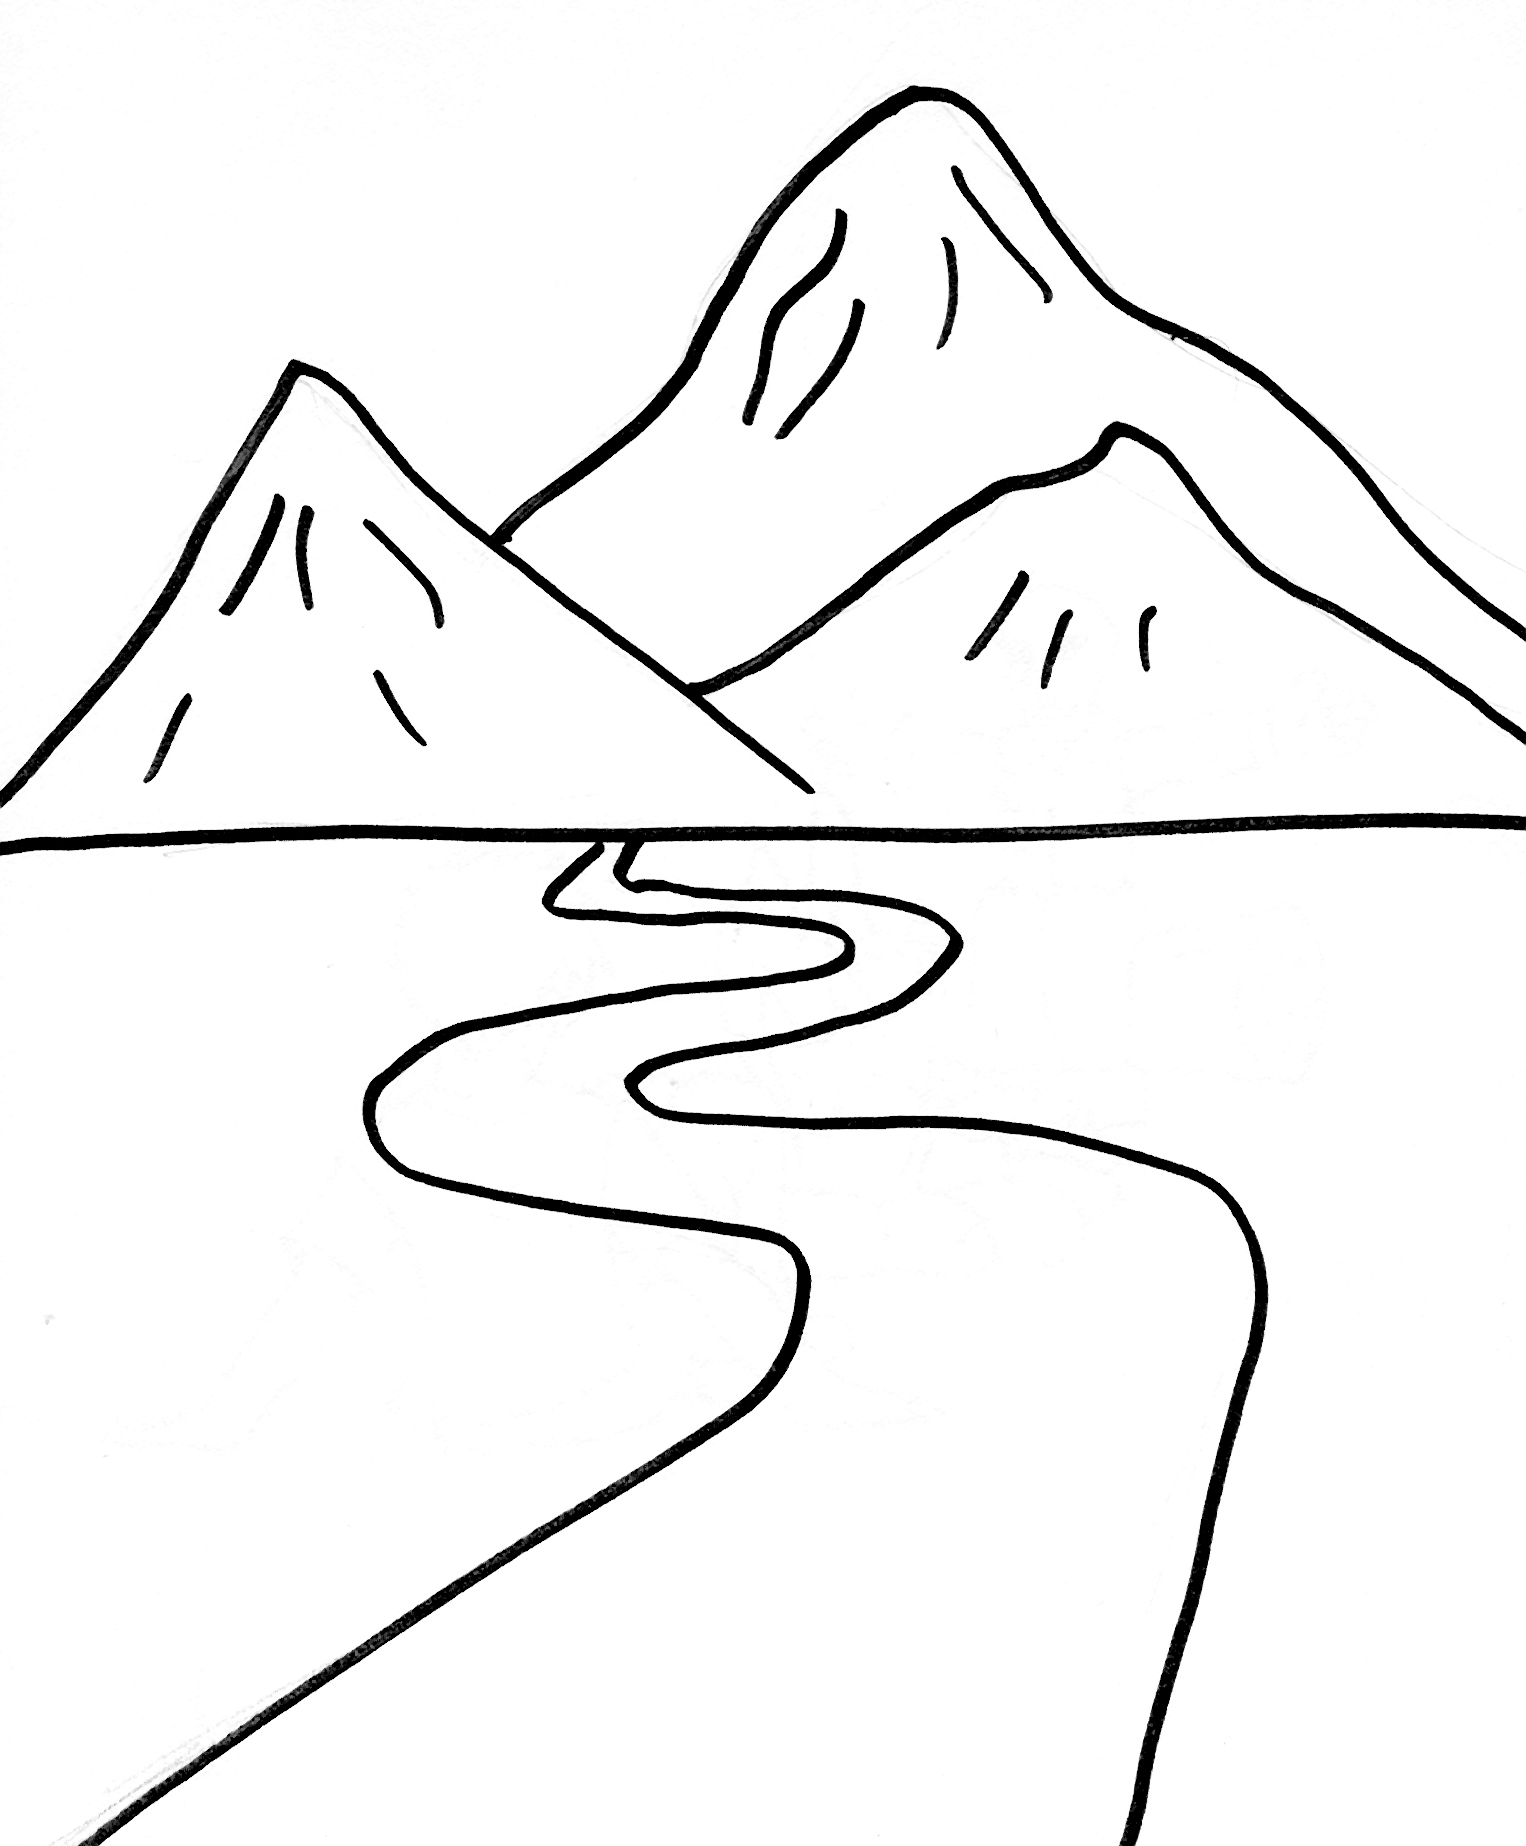 coloring-page-mountain-156483-nature-printable-coloring-pages